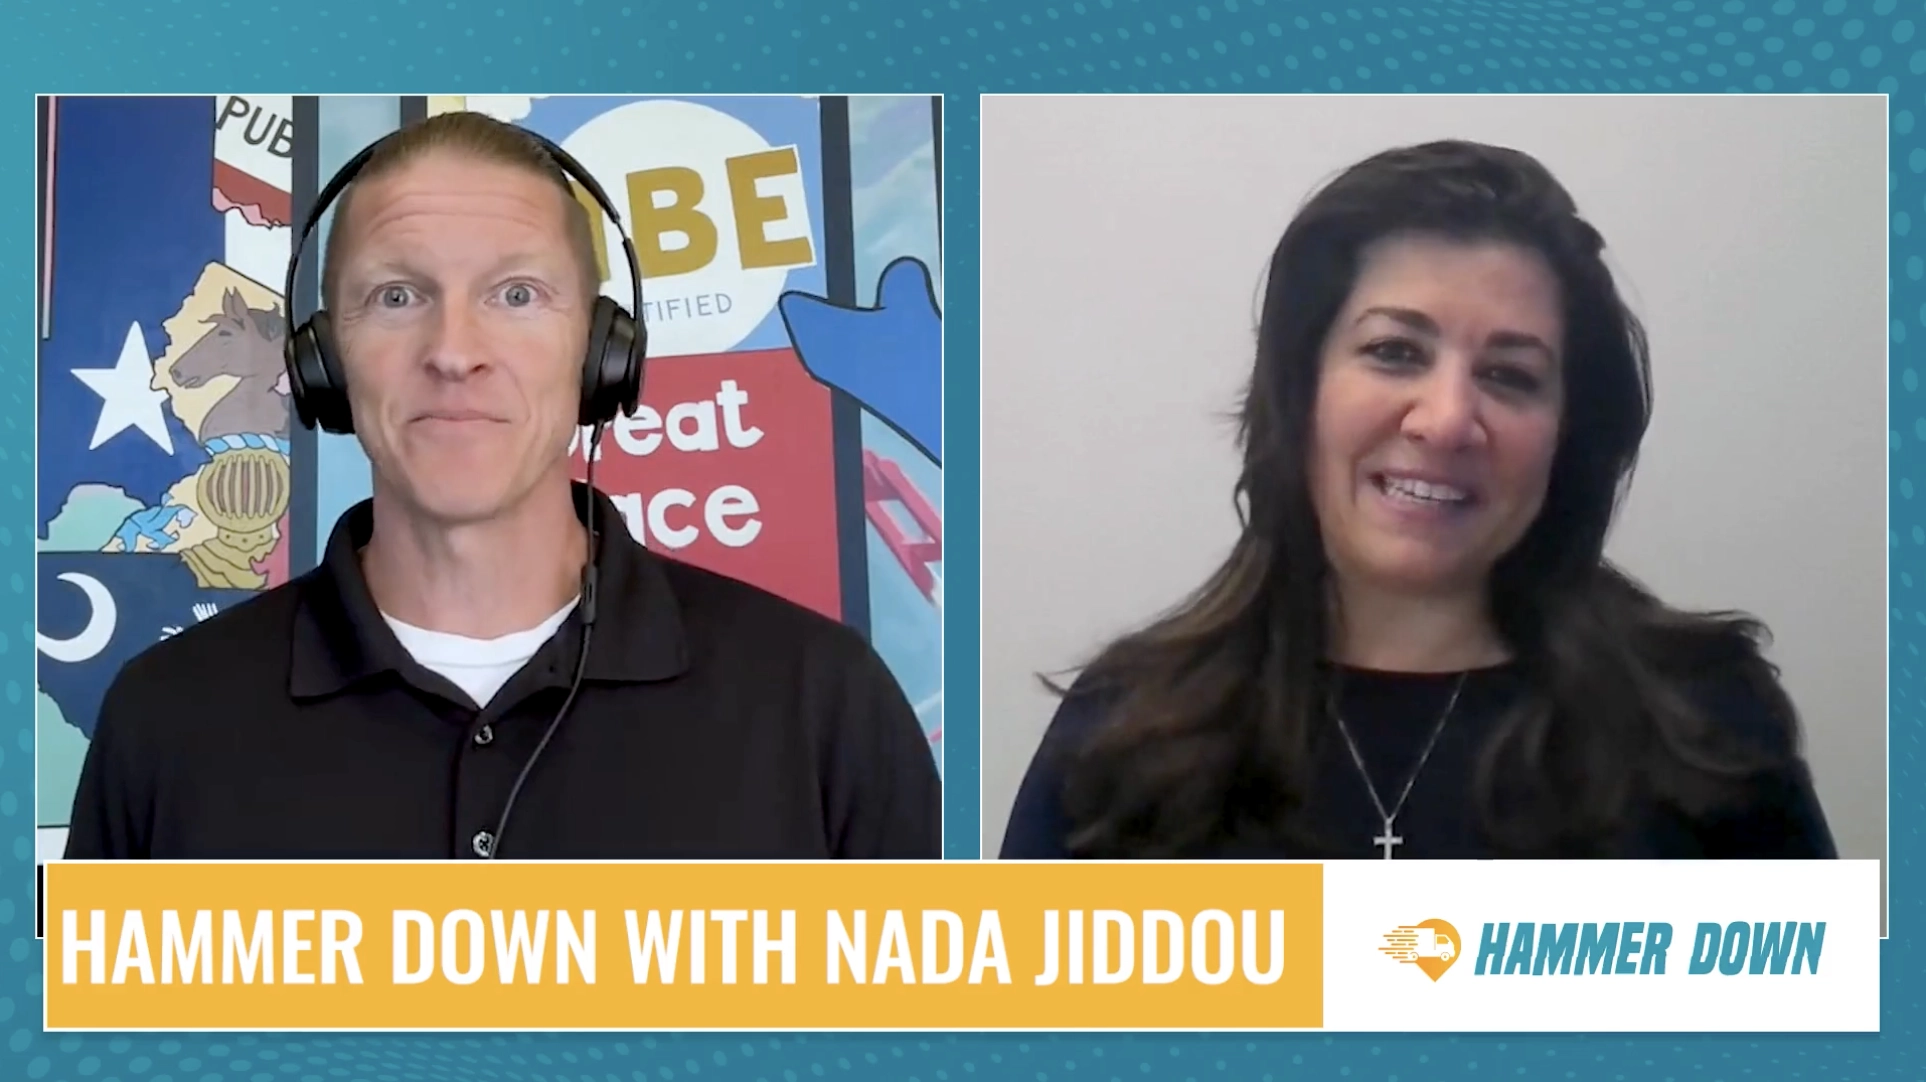 Hammer Down with Nada Jiddou: How Clarience Technologies is Revolutionizing Transportation Safety and Telematics